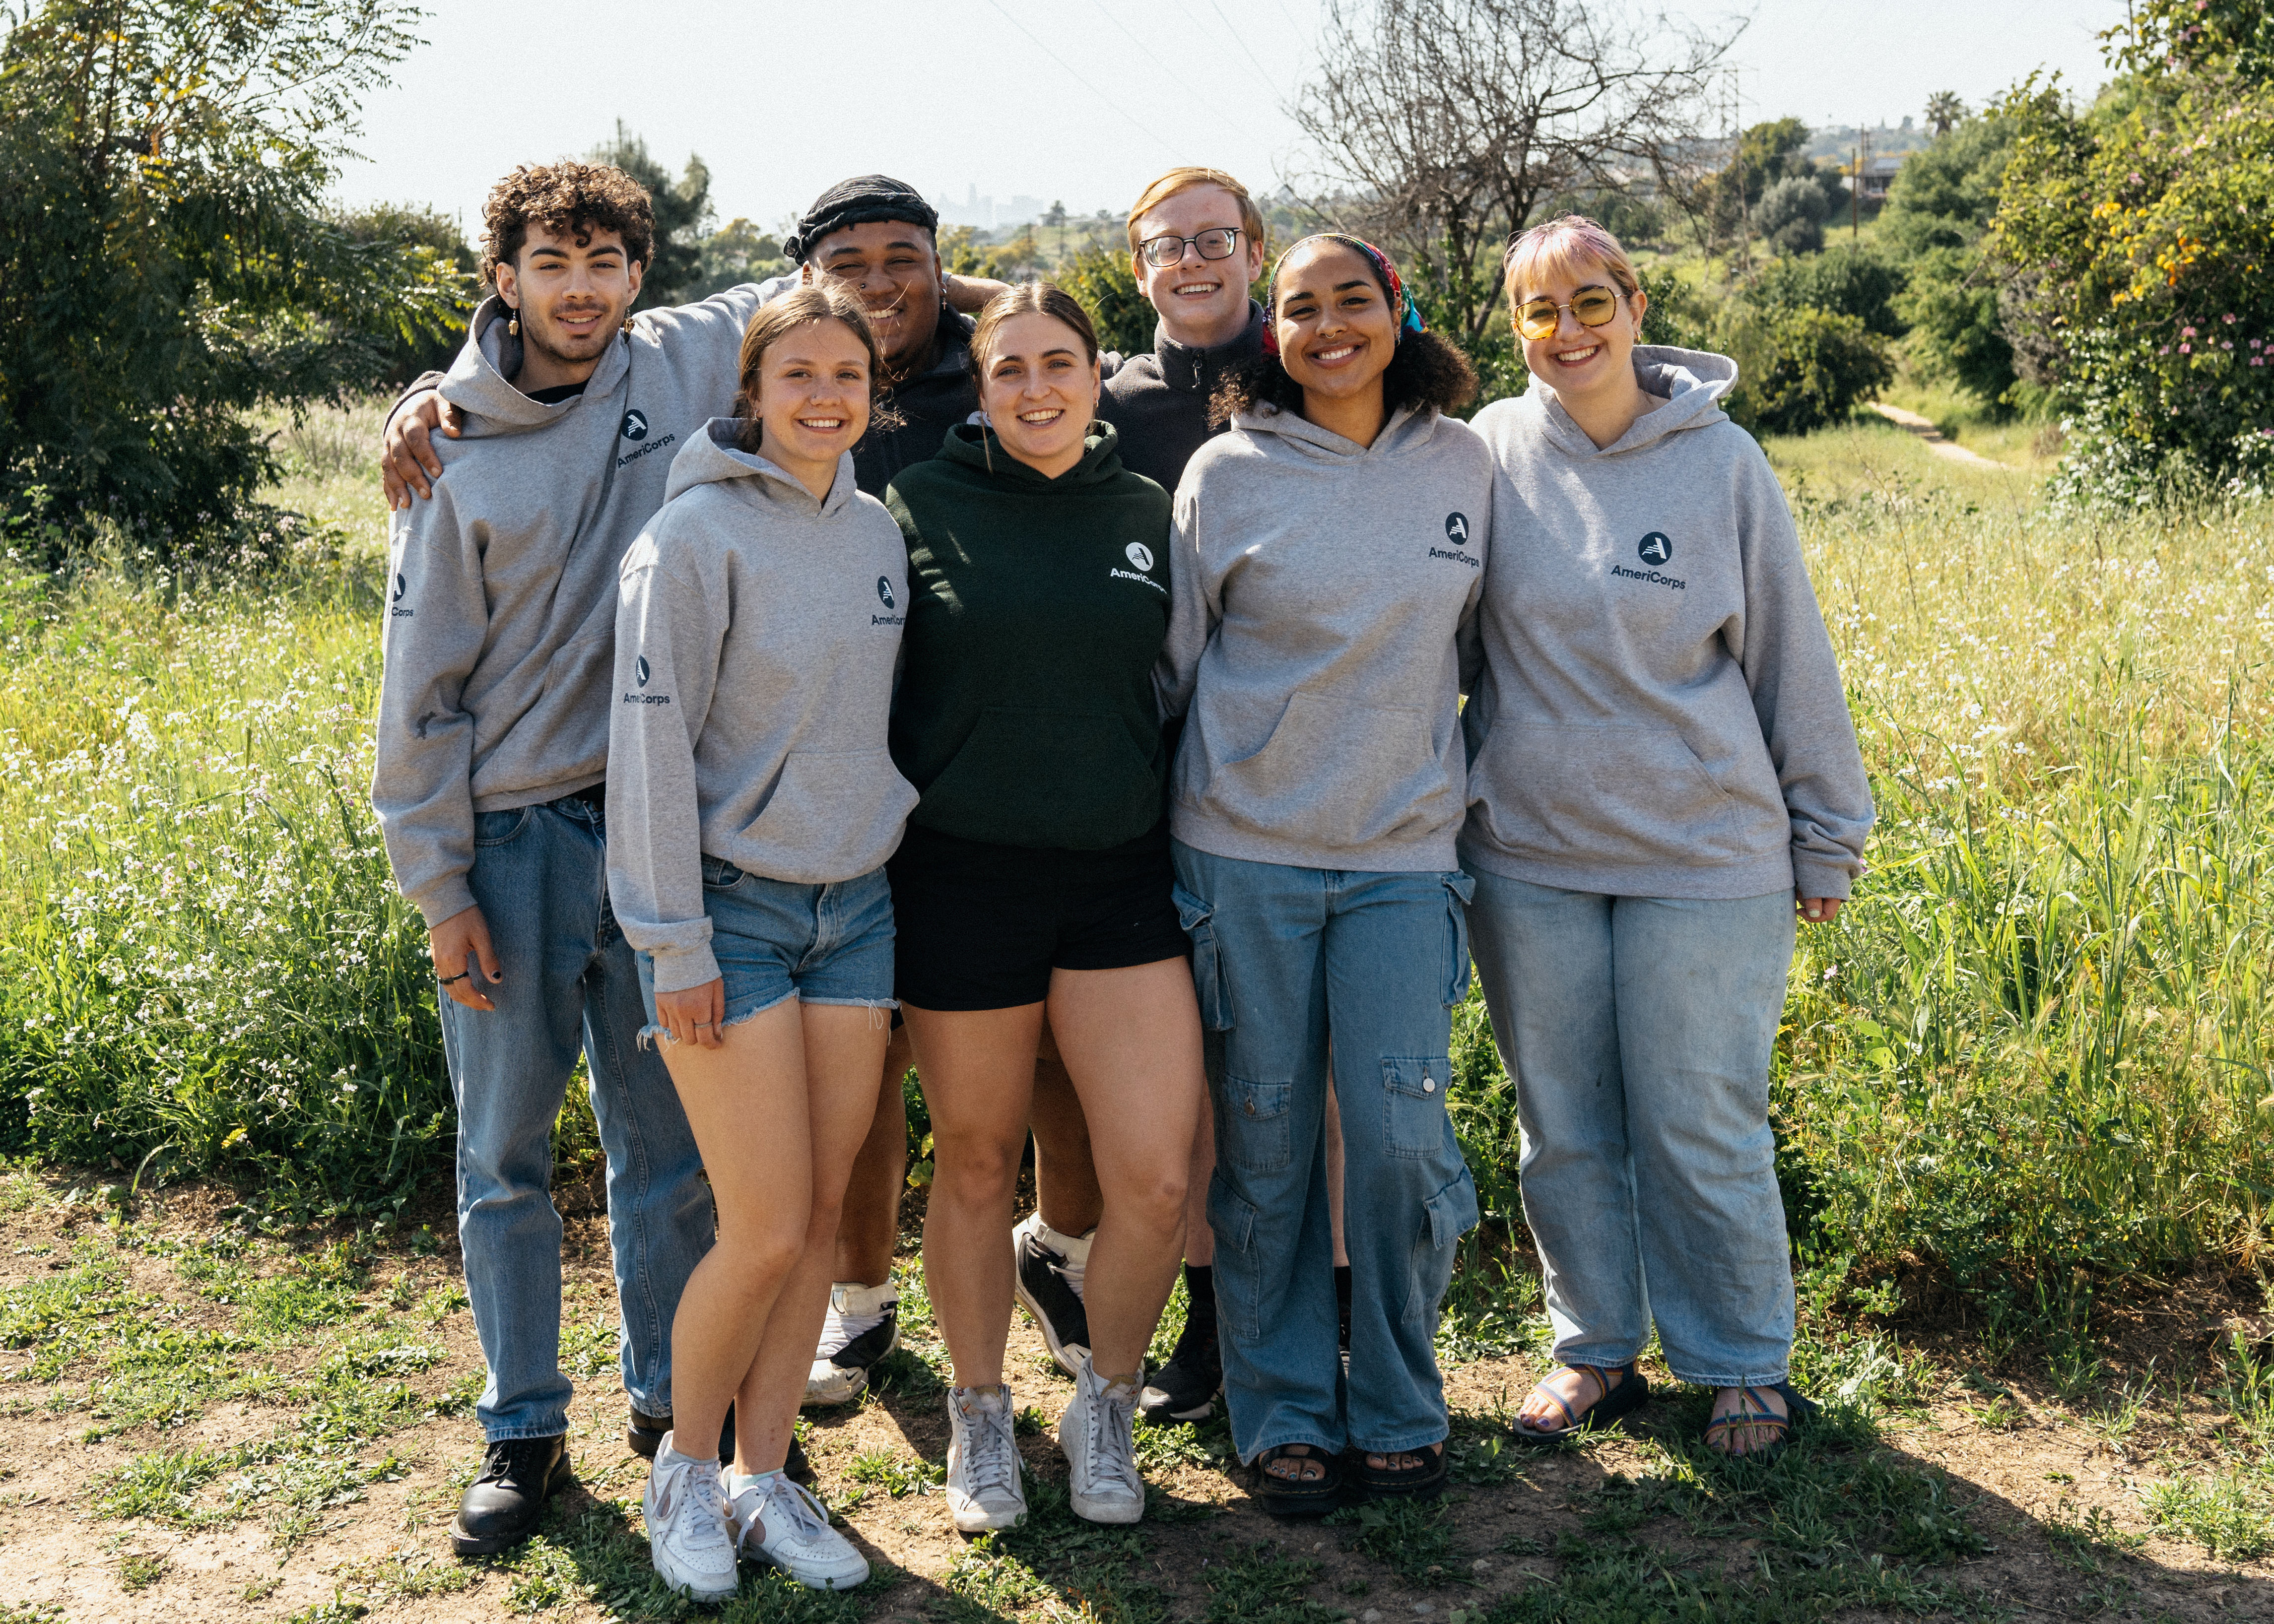 AmeriCorps members in the NCCC program